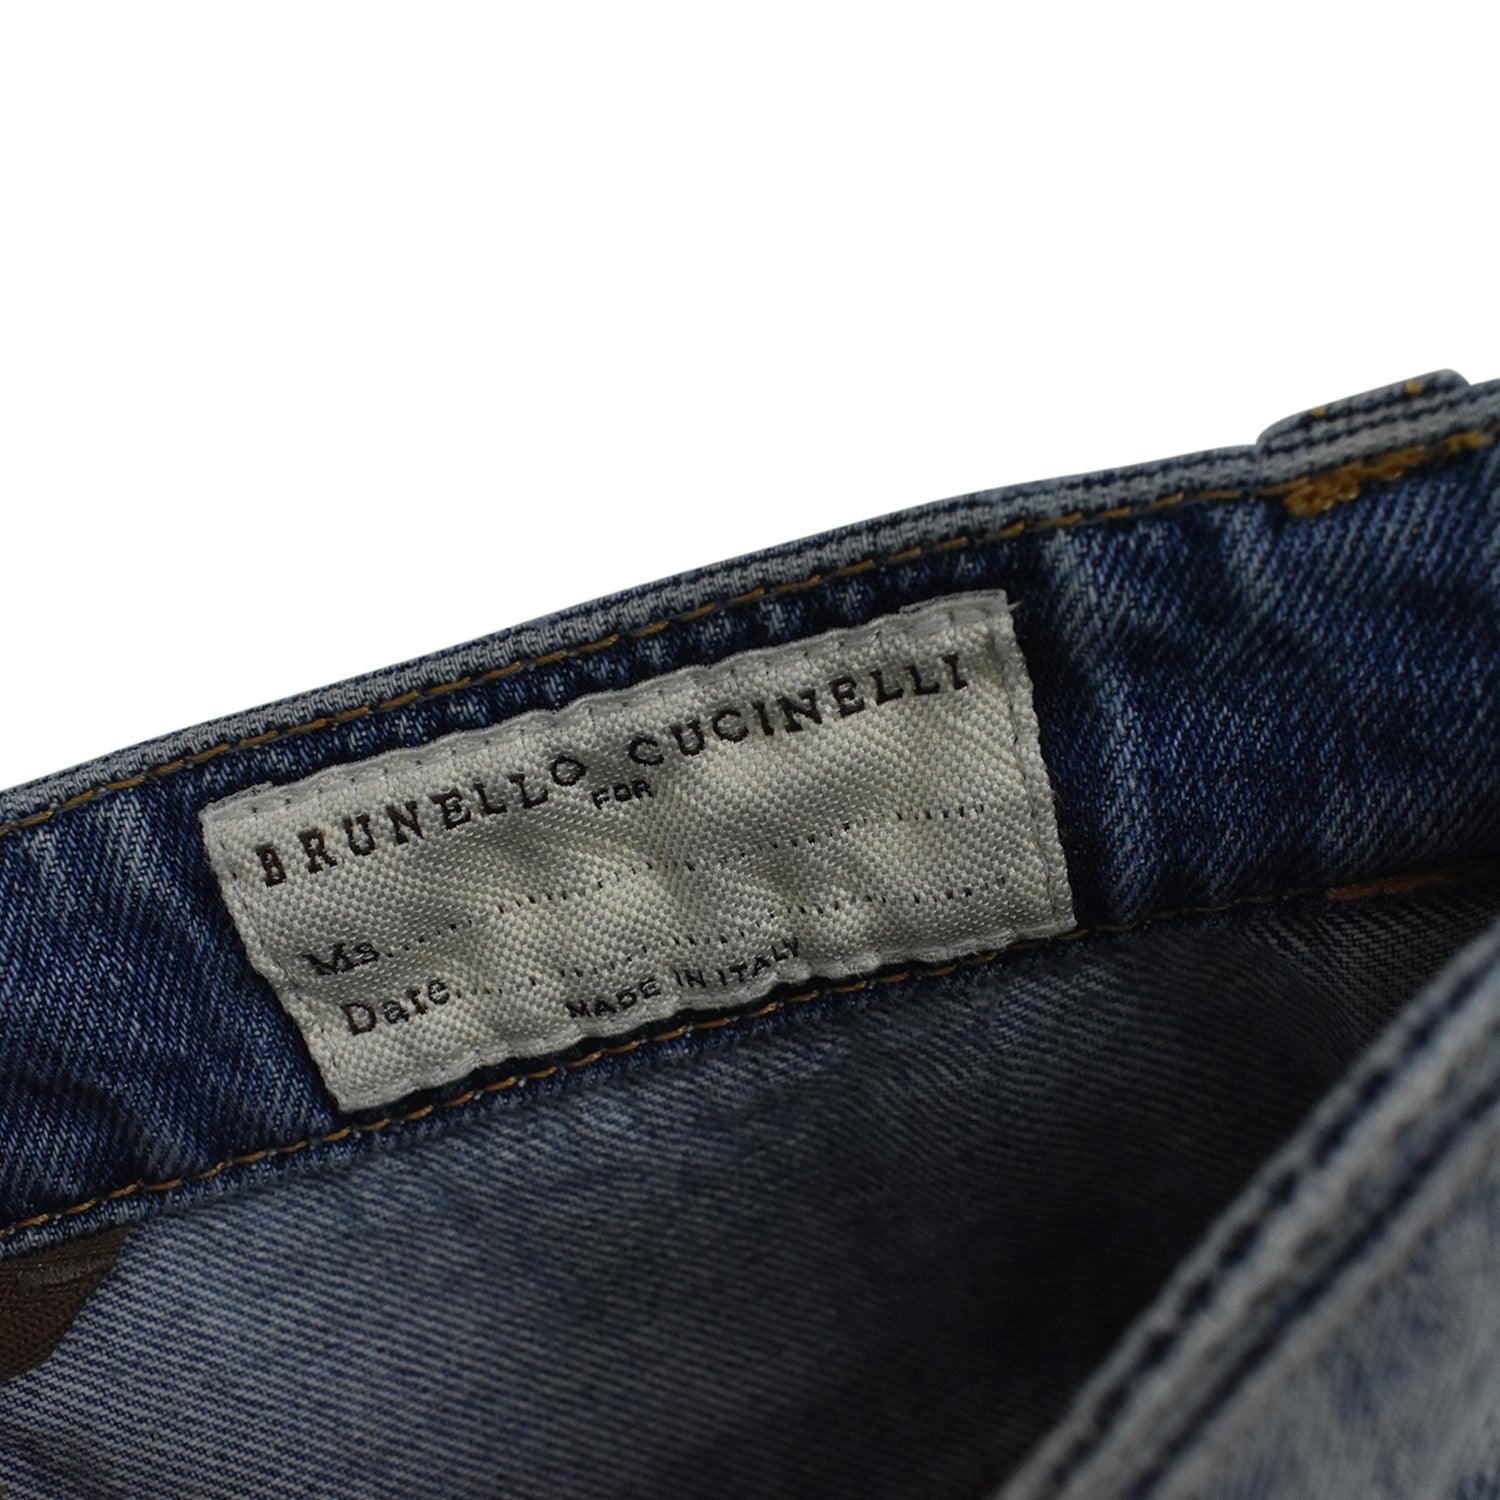 Brunello Cucinelli Jeans - Women's 4 - Fashionably Yours